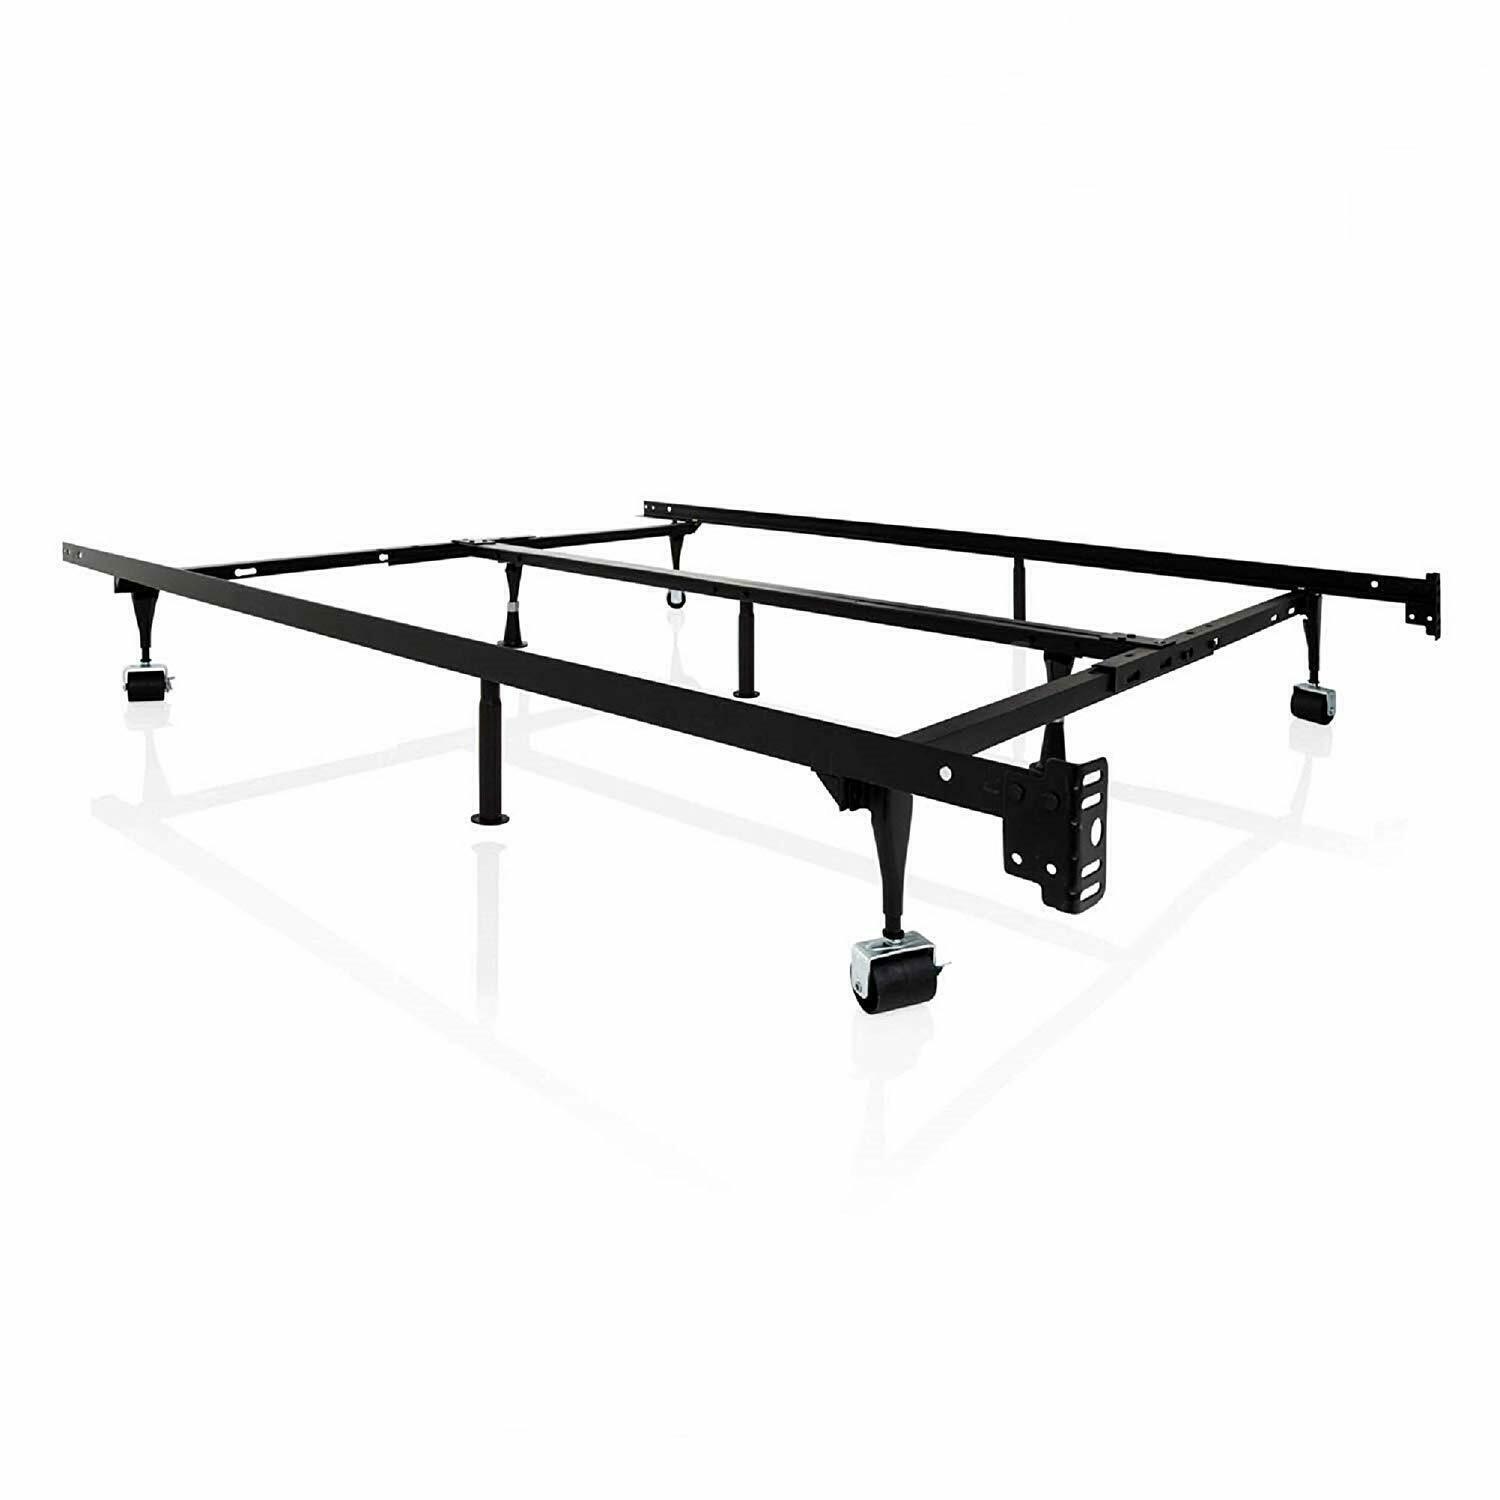 STRUCTURES Malouf Heavy Duty 9-Leg Adjustable Metal Bed Frame King